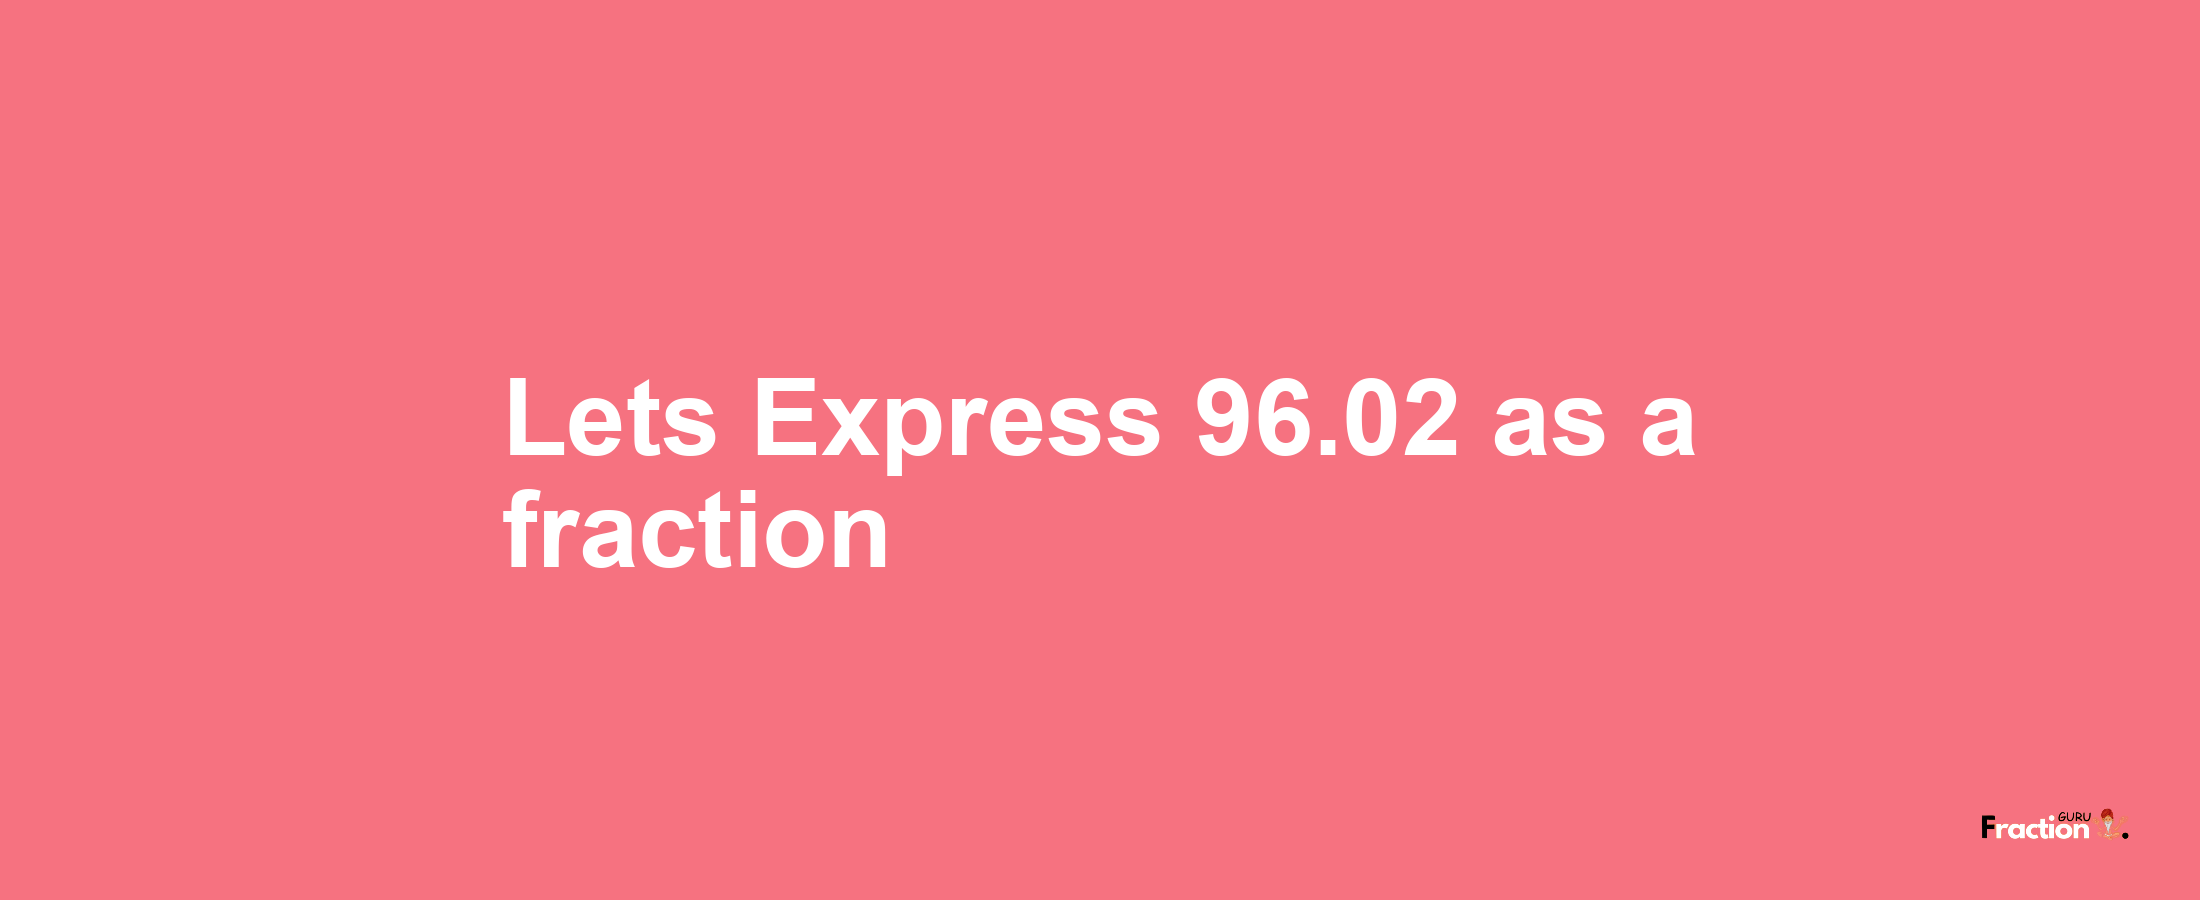 Lets Express 96.02 as afraction